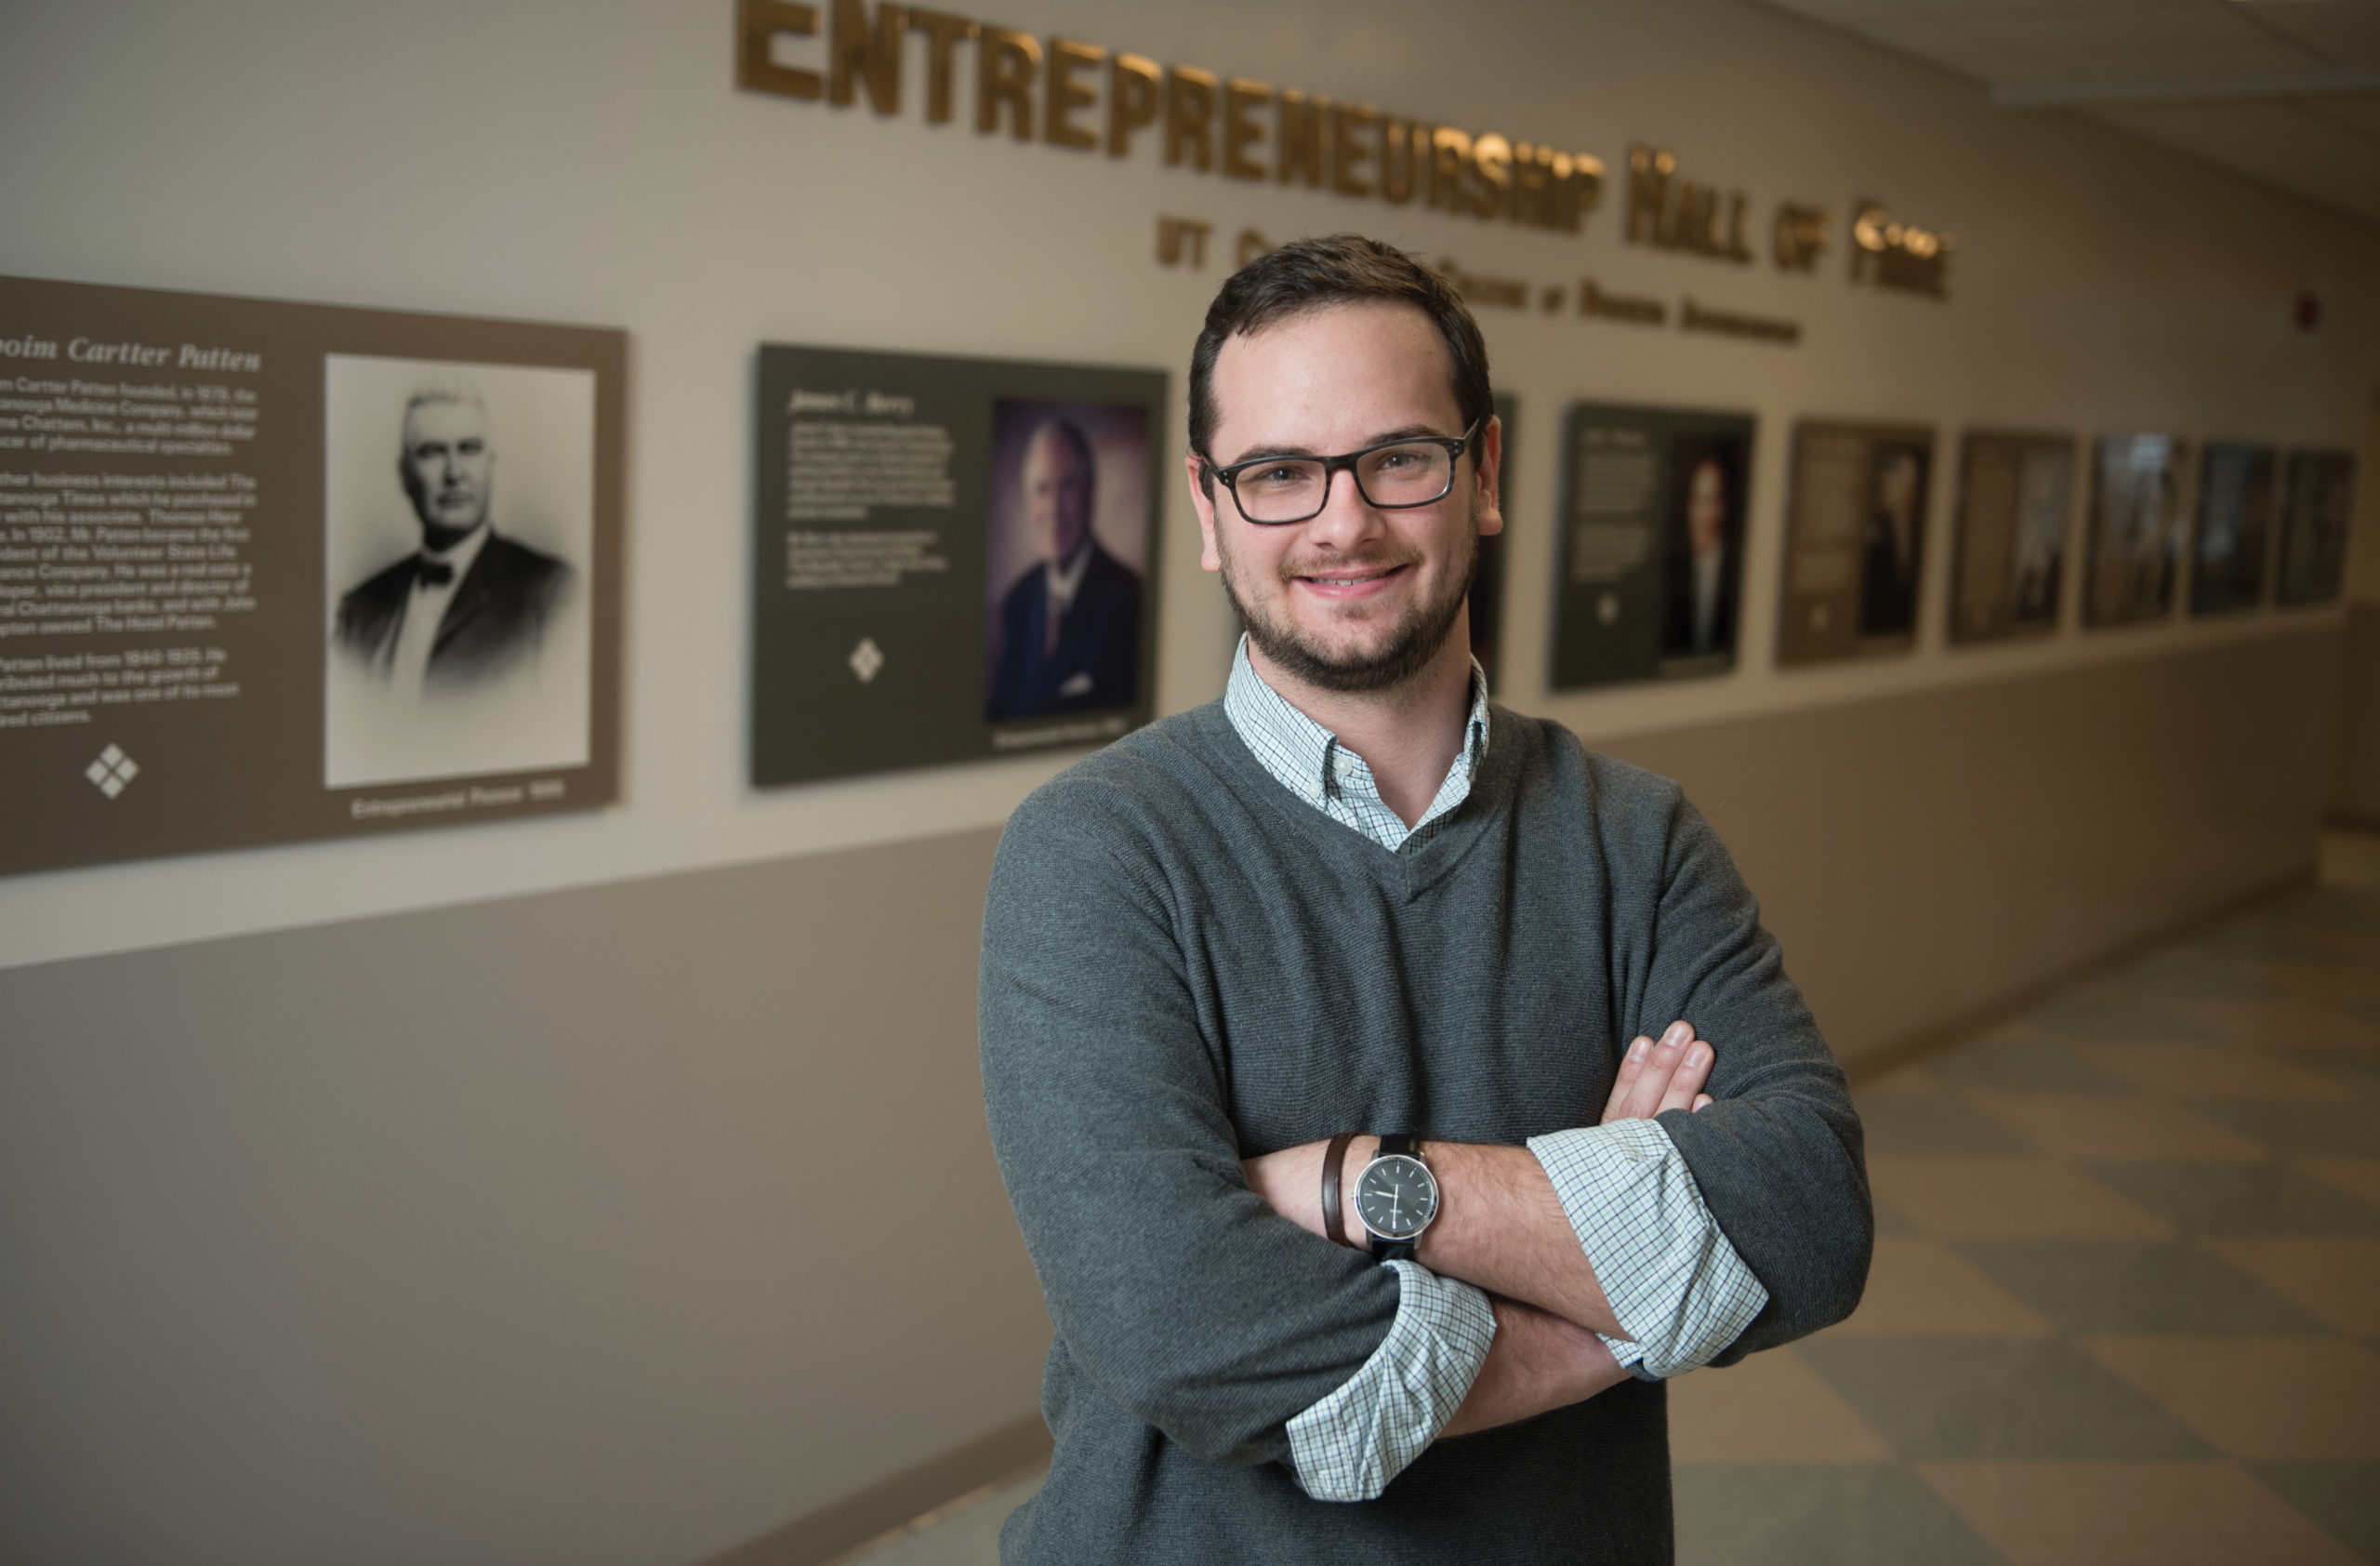 Shane Cotriss stands in front of the Entrepreneurship Wall of Fame at UTC